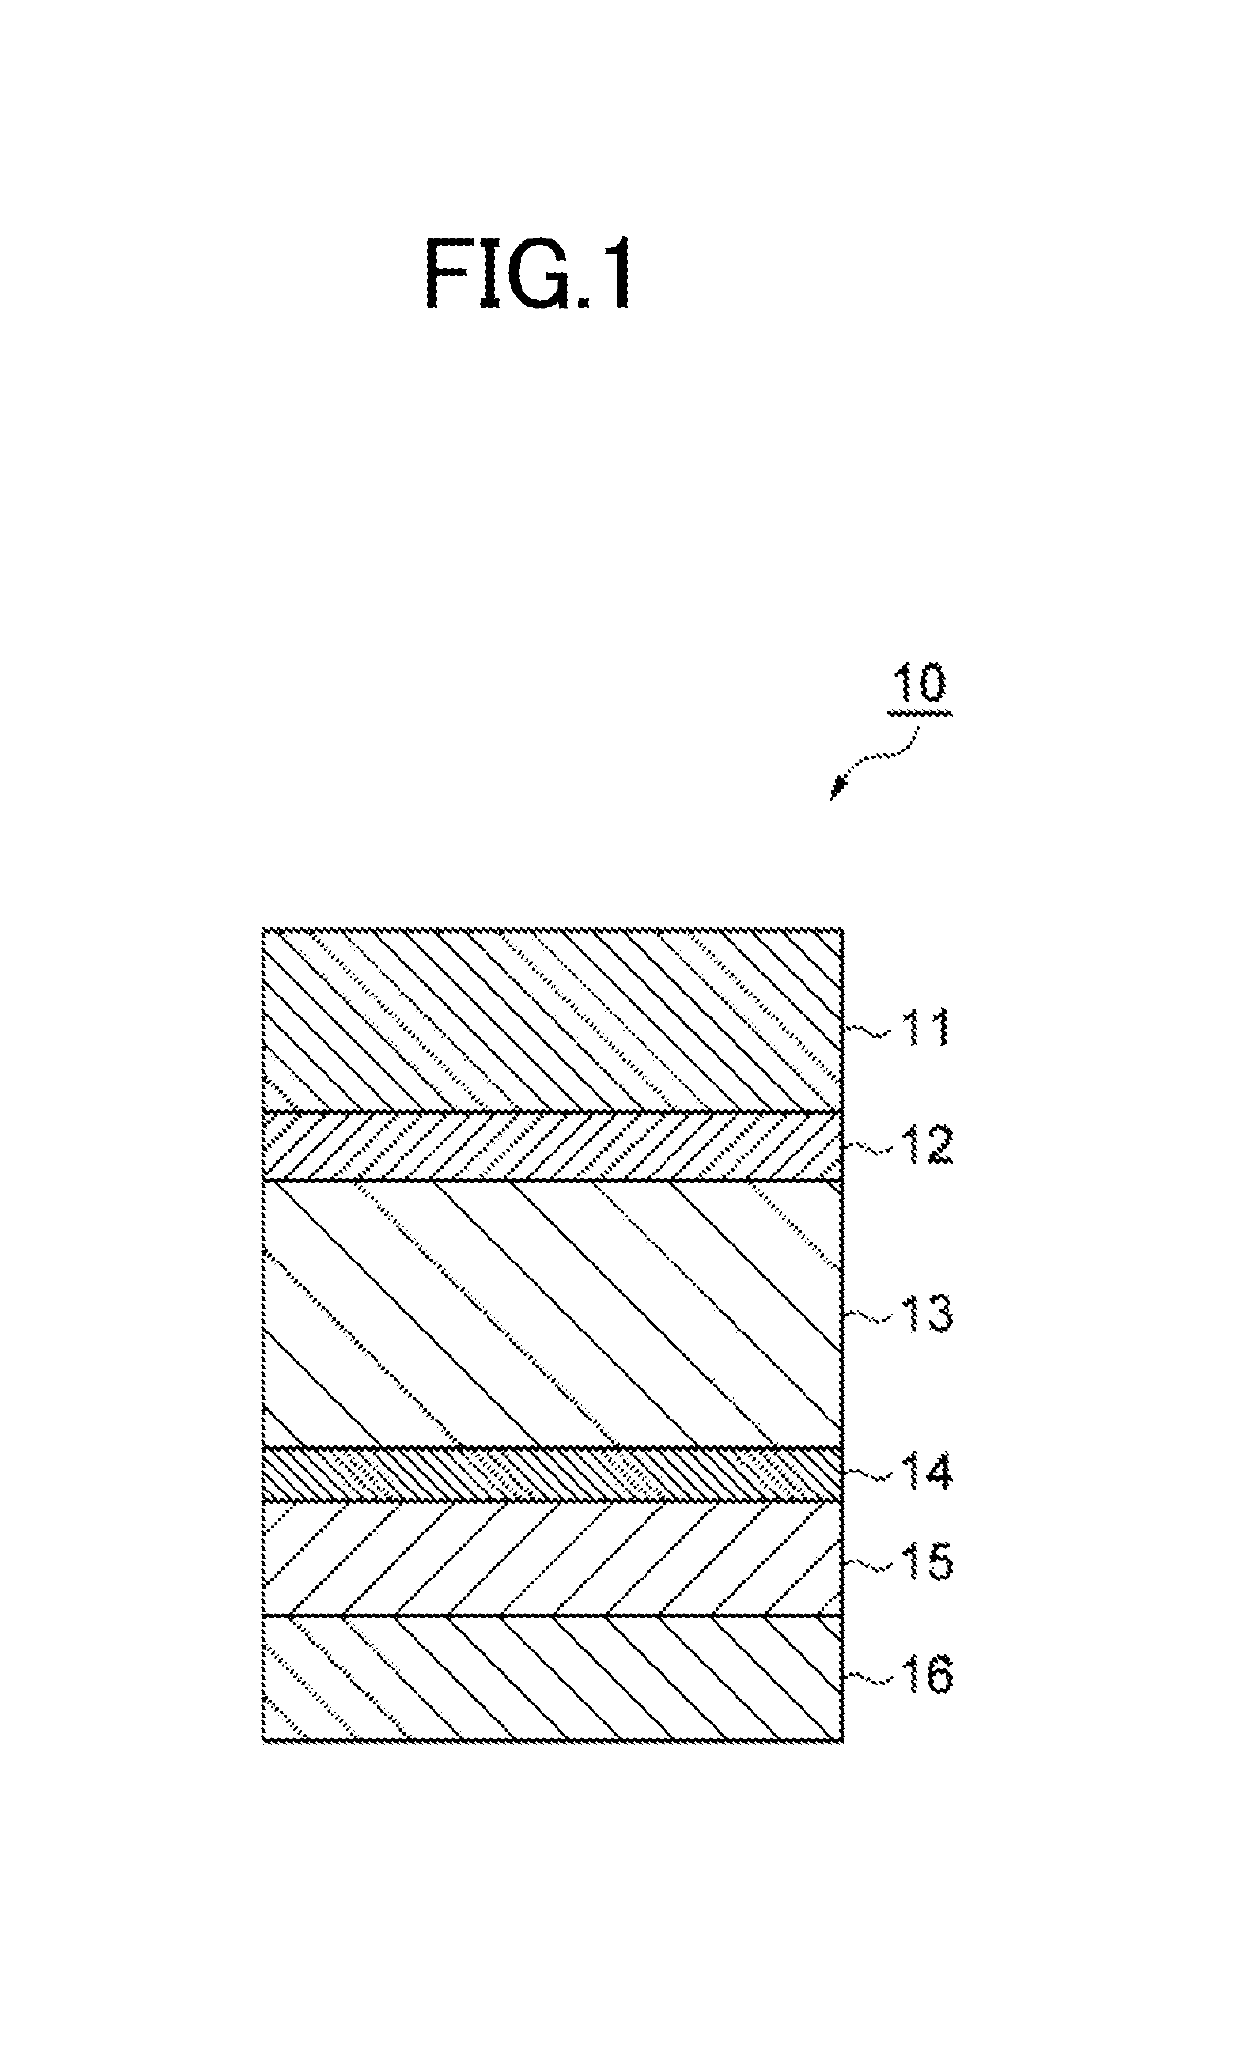 Packaging material for power storage device